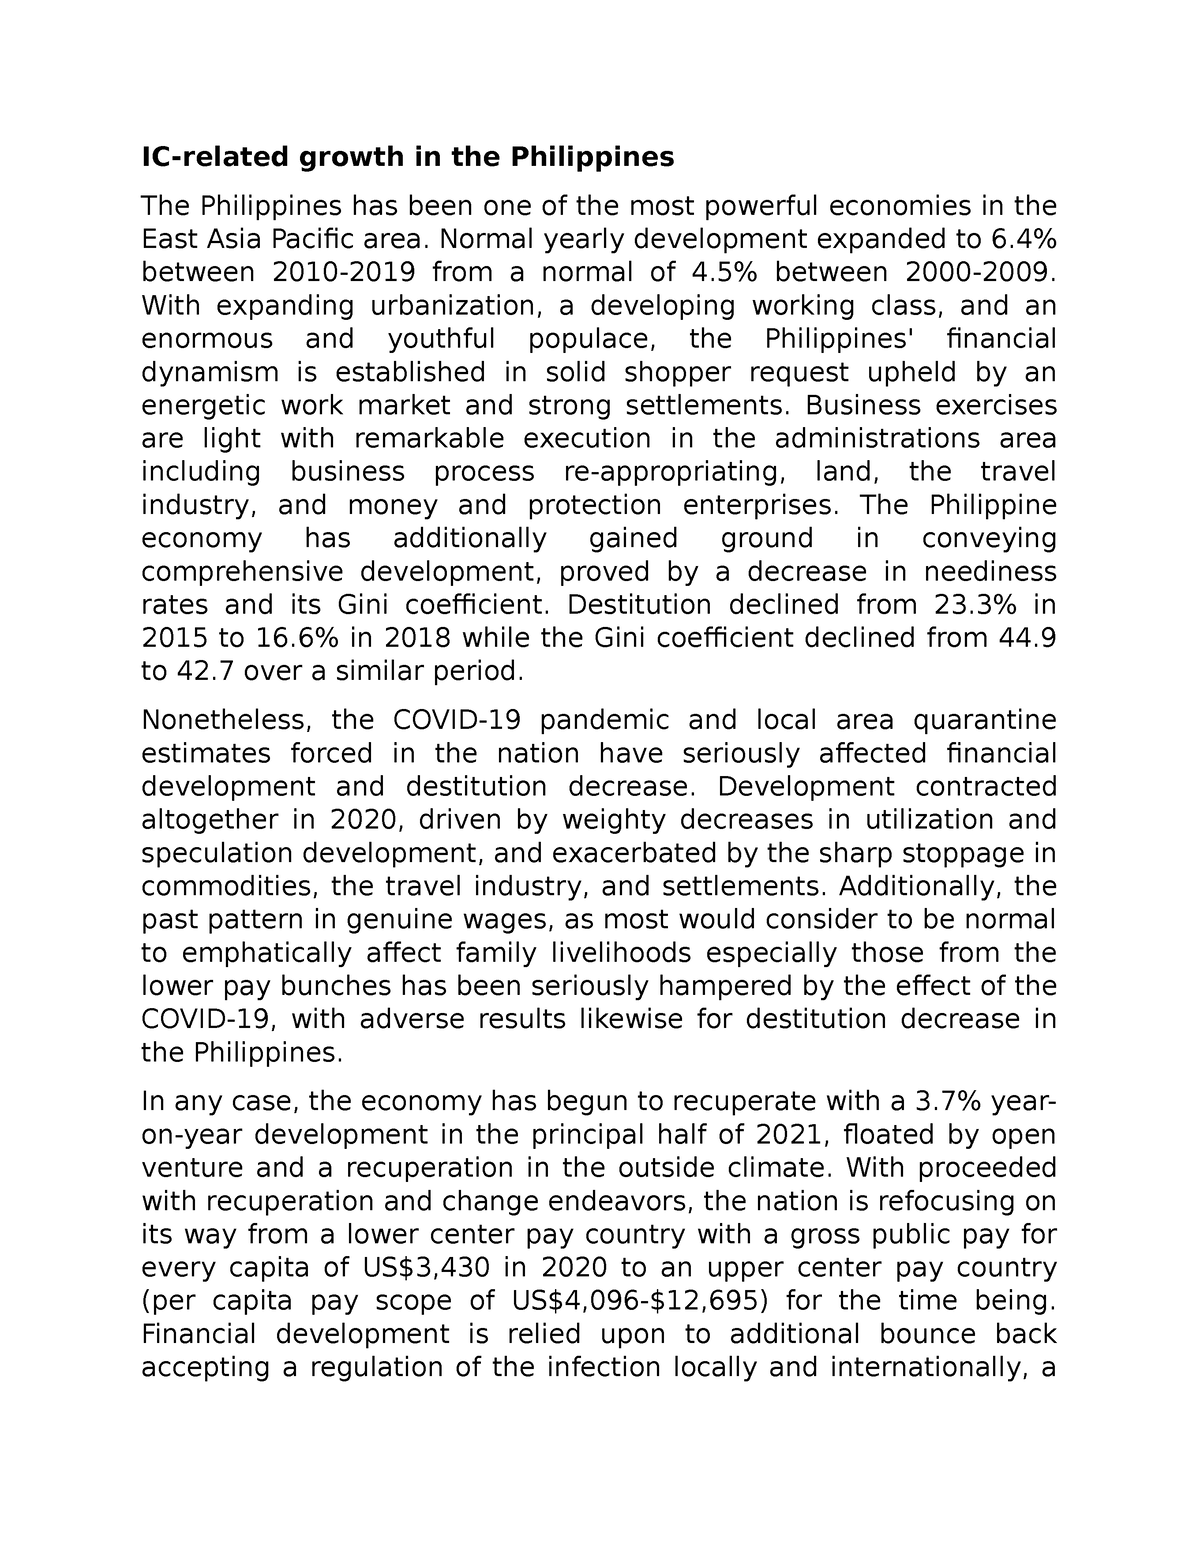 essay about economic growth in the philippines